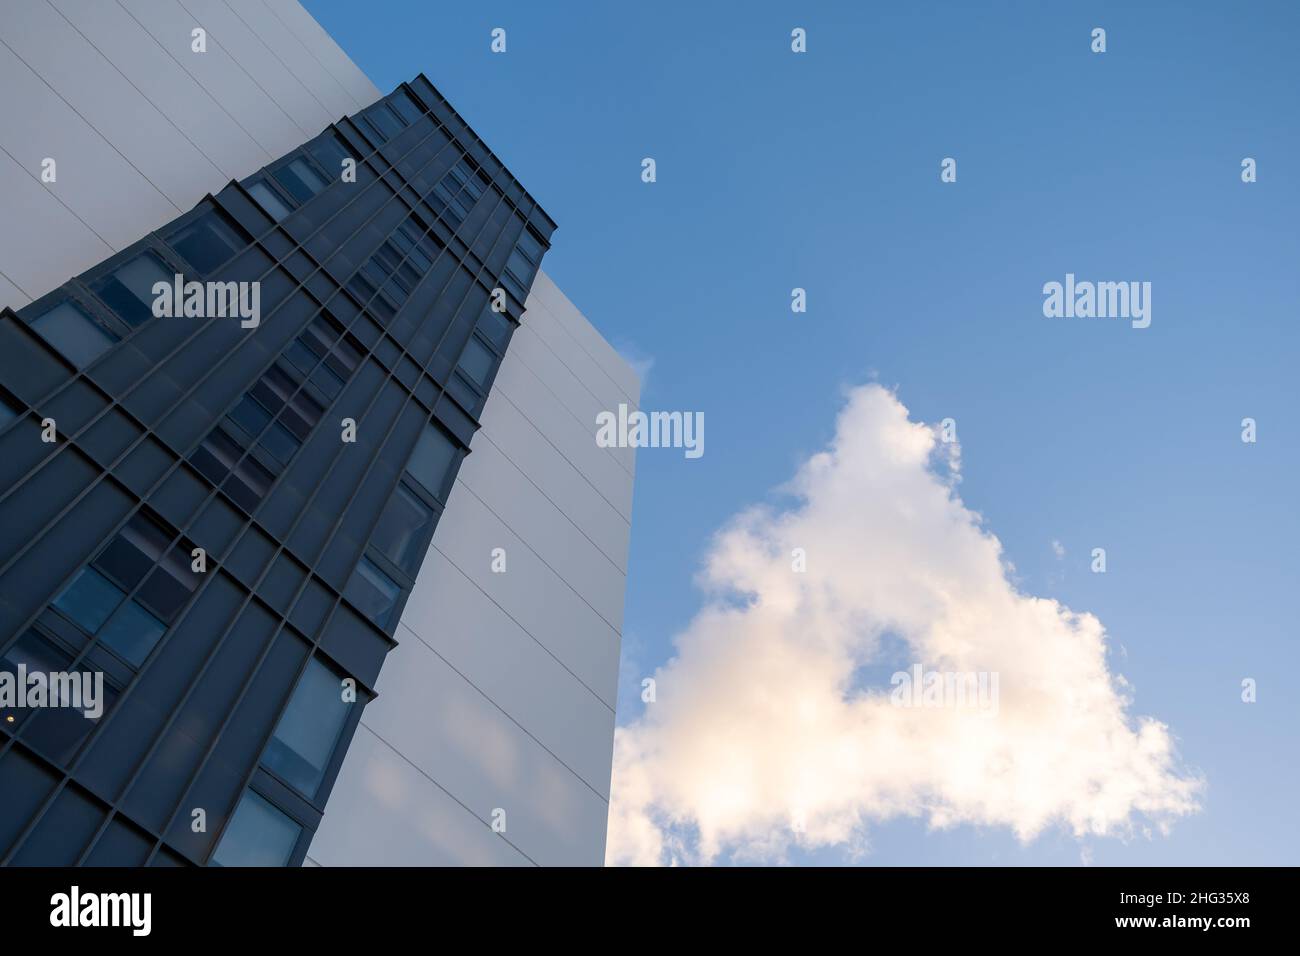 Looking up at residential building and rare cloiud in a form of triangle with blue sky and copy space Stock Photo